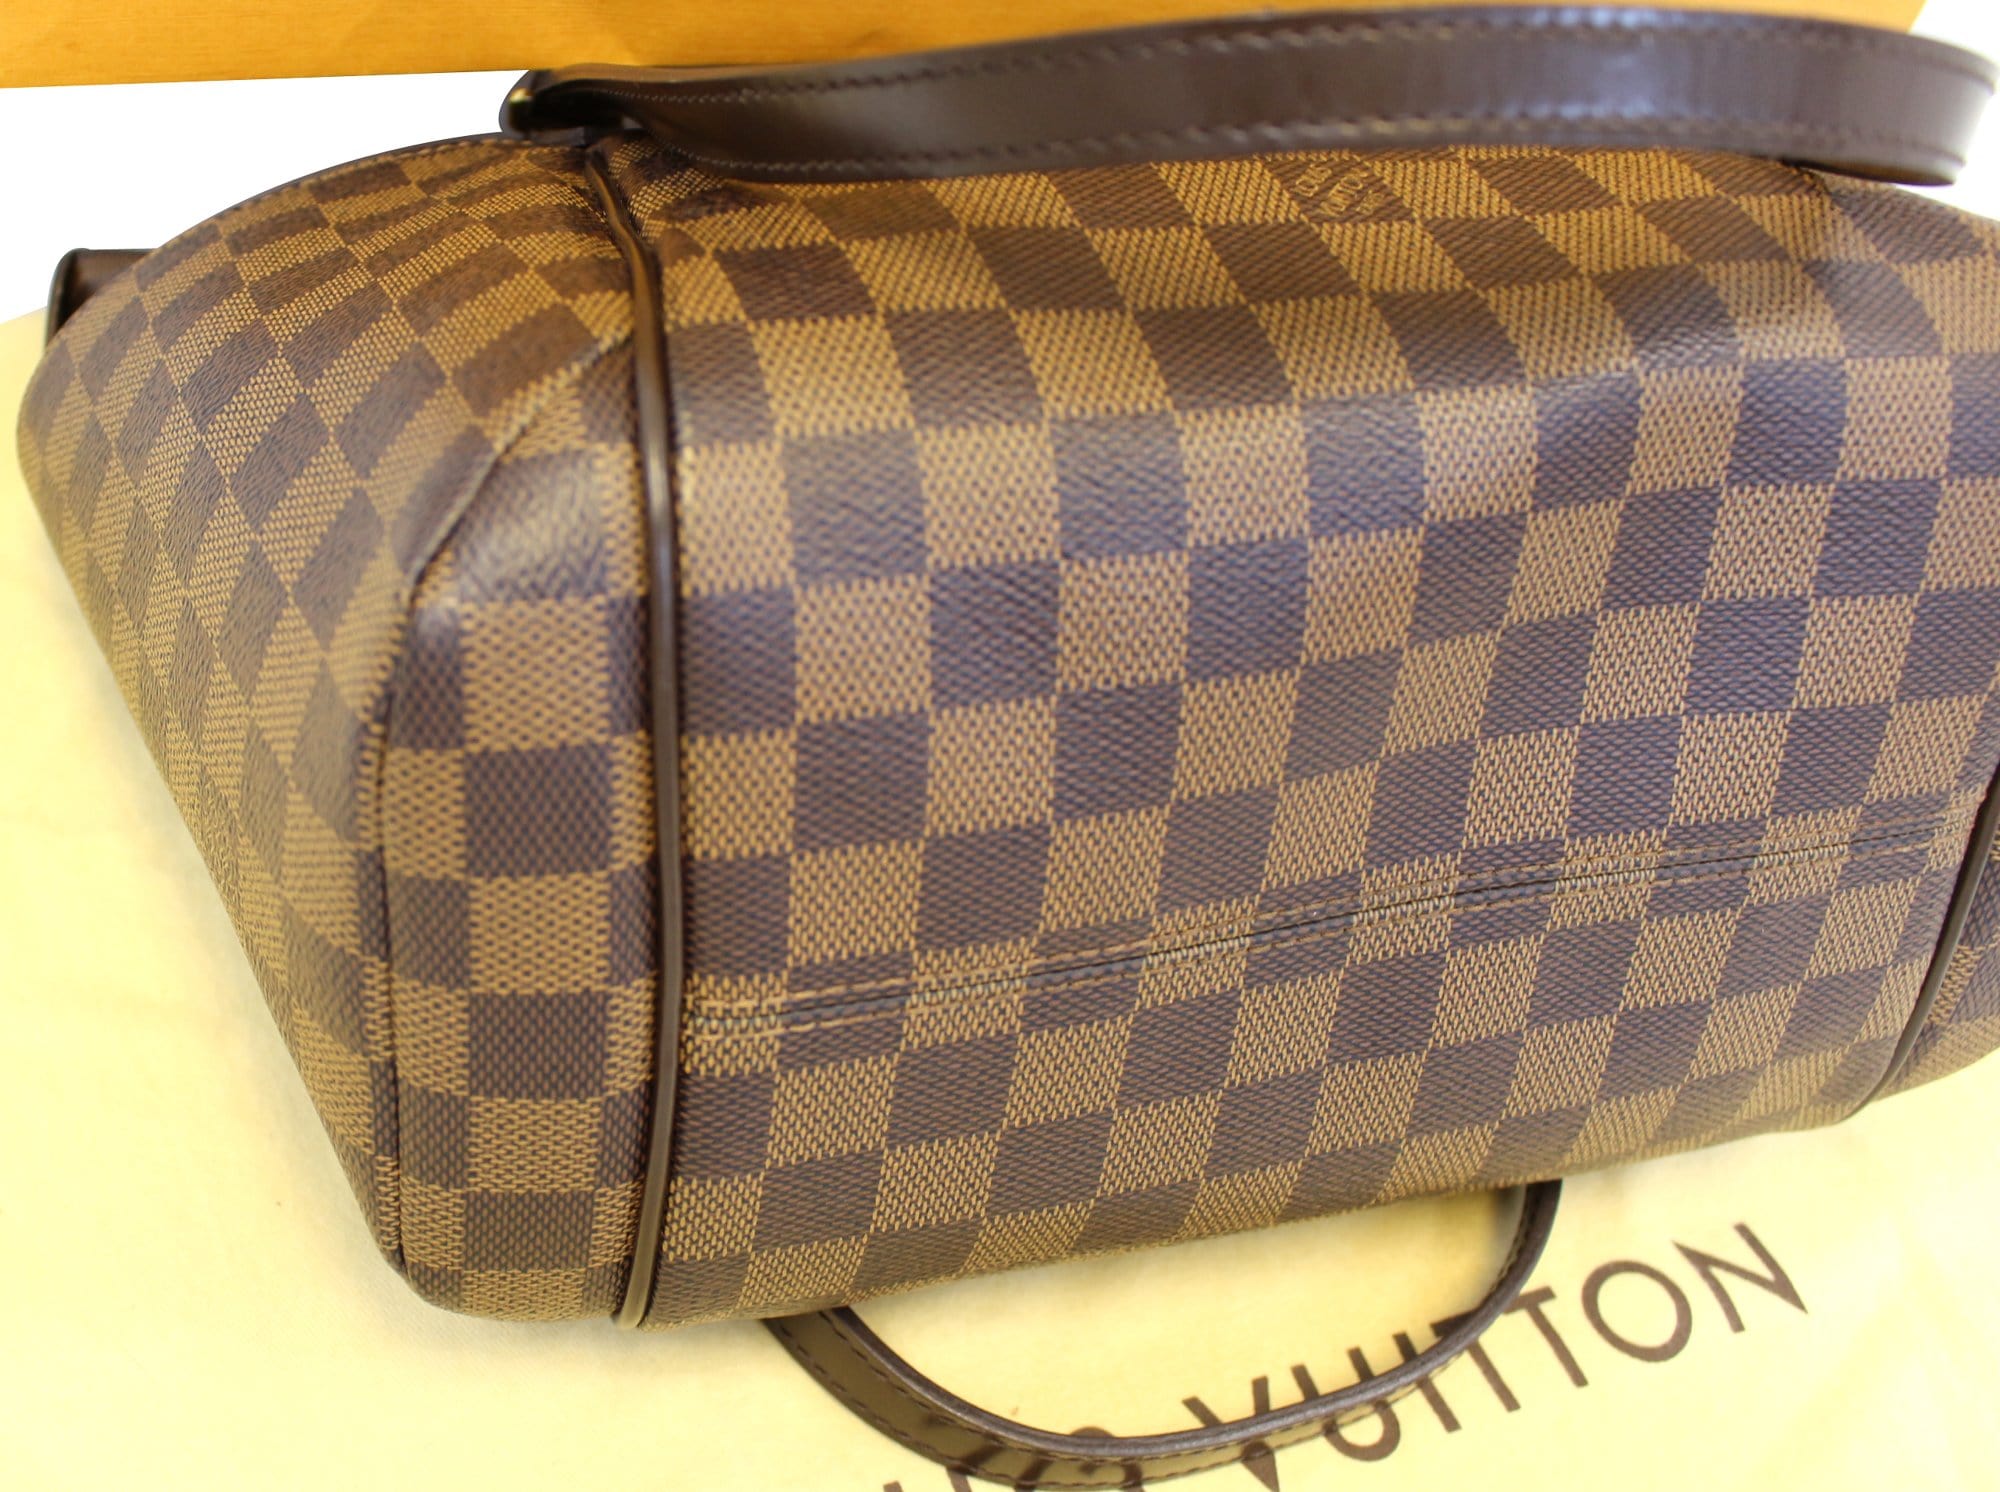 ❌SOLD!❌ Good Deal! LV Louis Vuitton Totally PM in Monogram Canvas